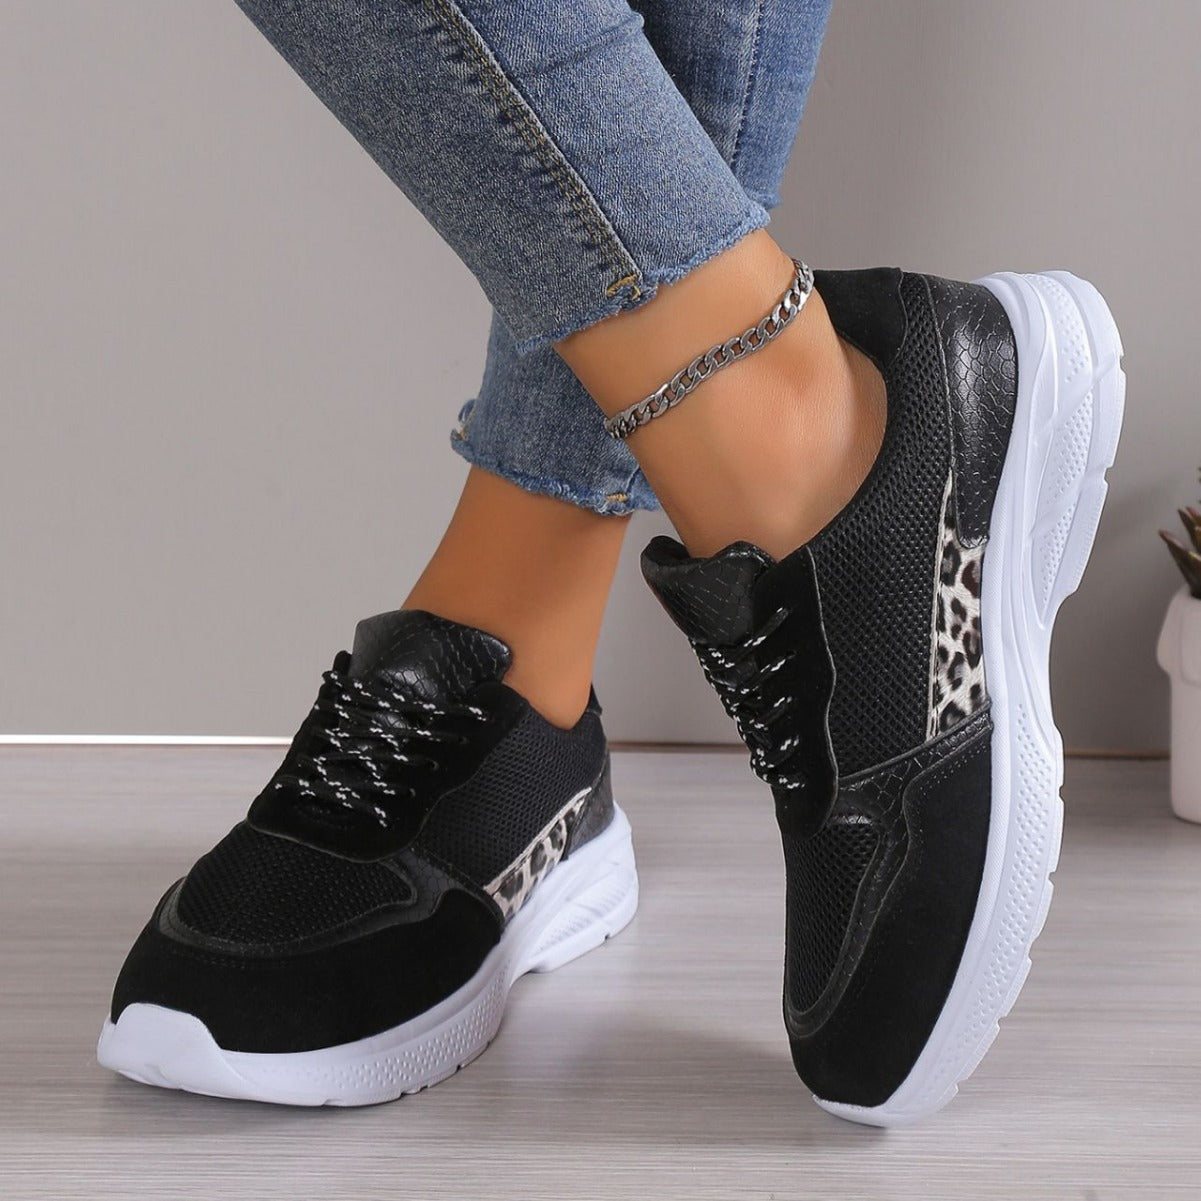 Lace Up Sneakers Breathable Mesh Flat Shoes Fashion Casual Lightweight